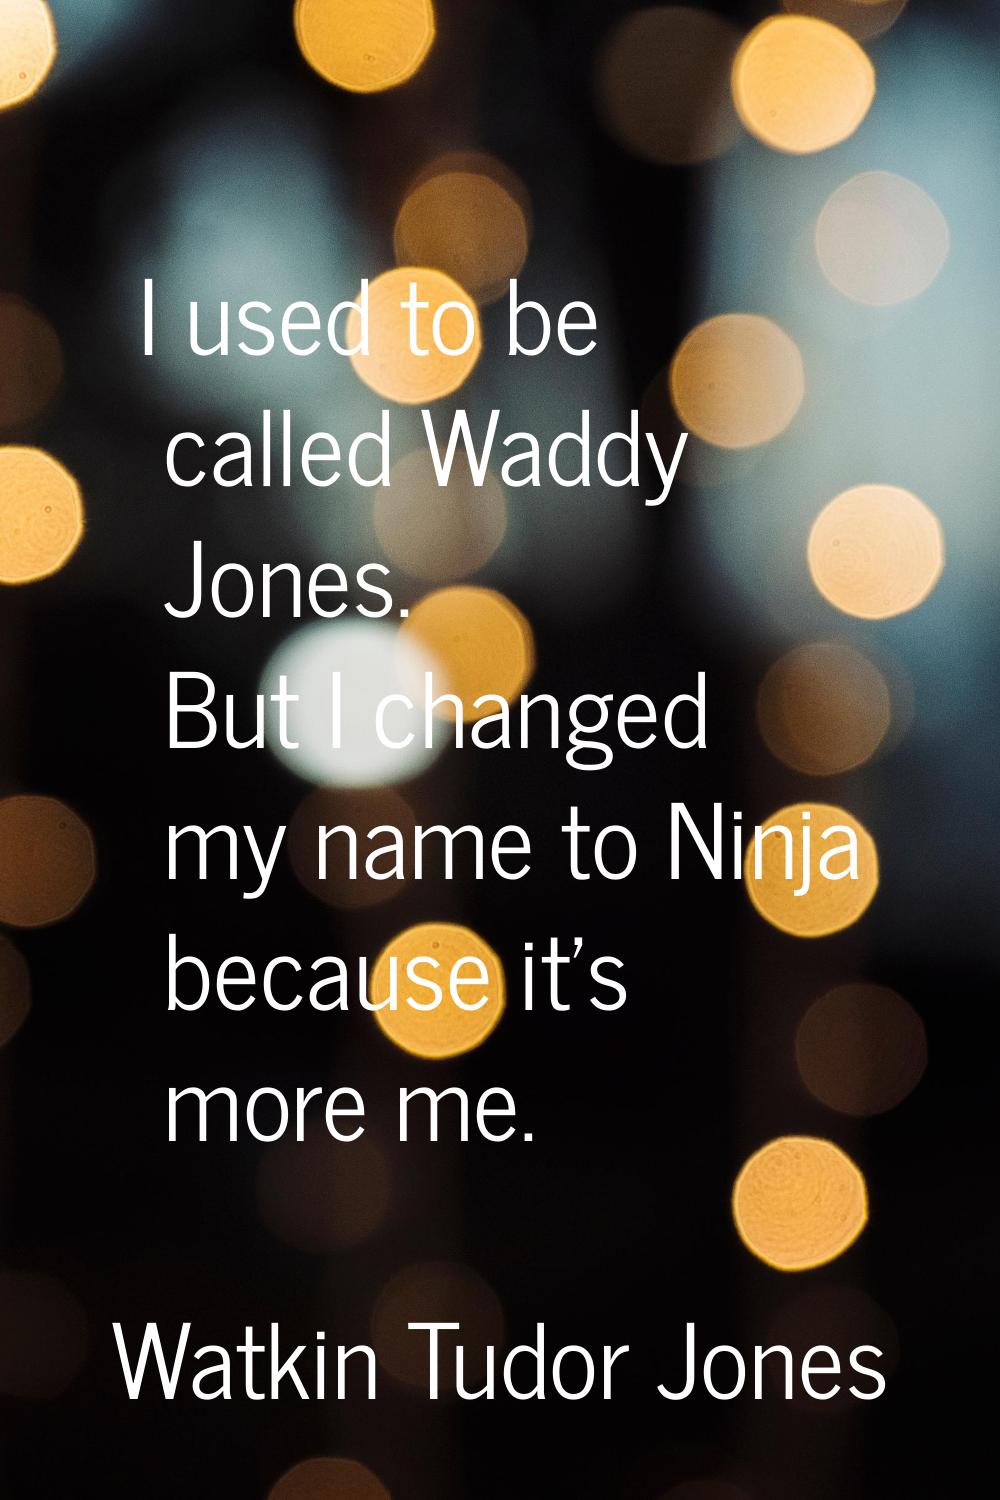 I used to be called Waddy Jones. But I changed my name to Ninja because it's more me.